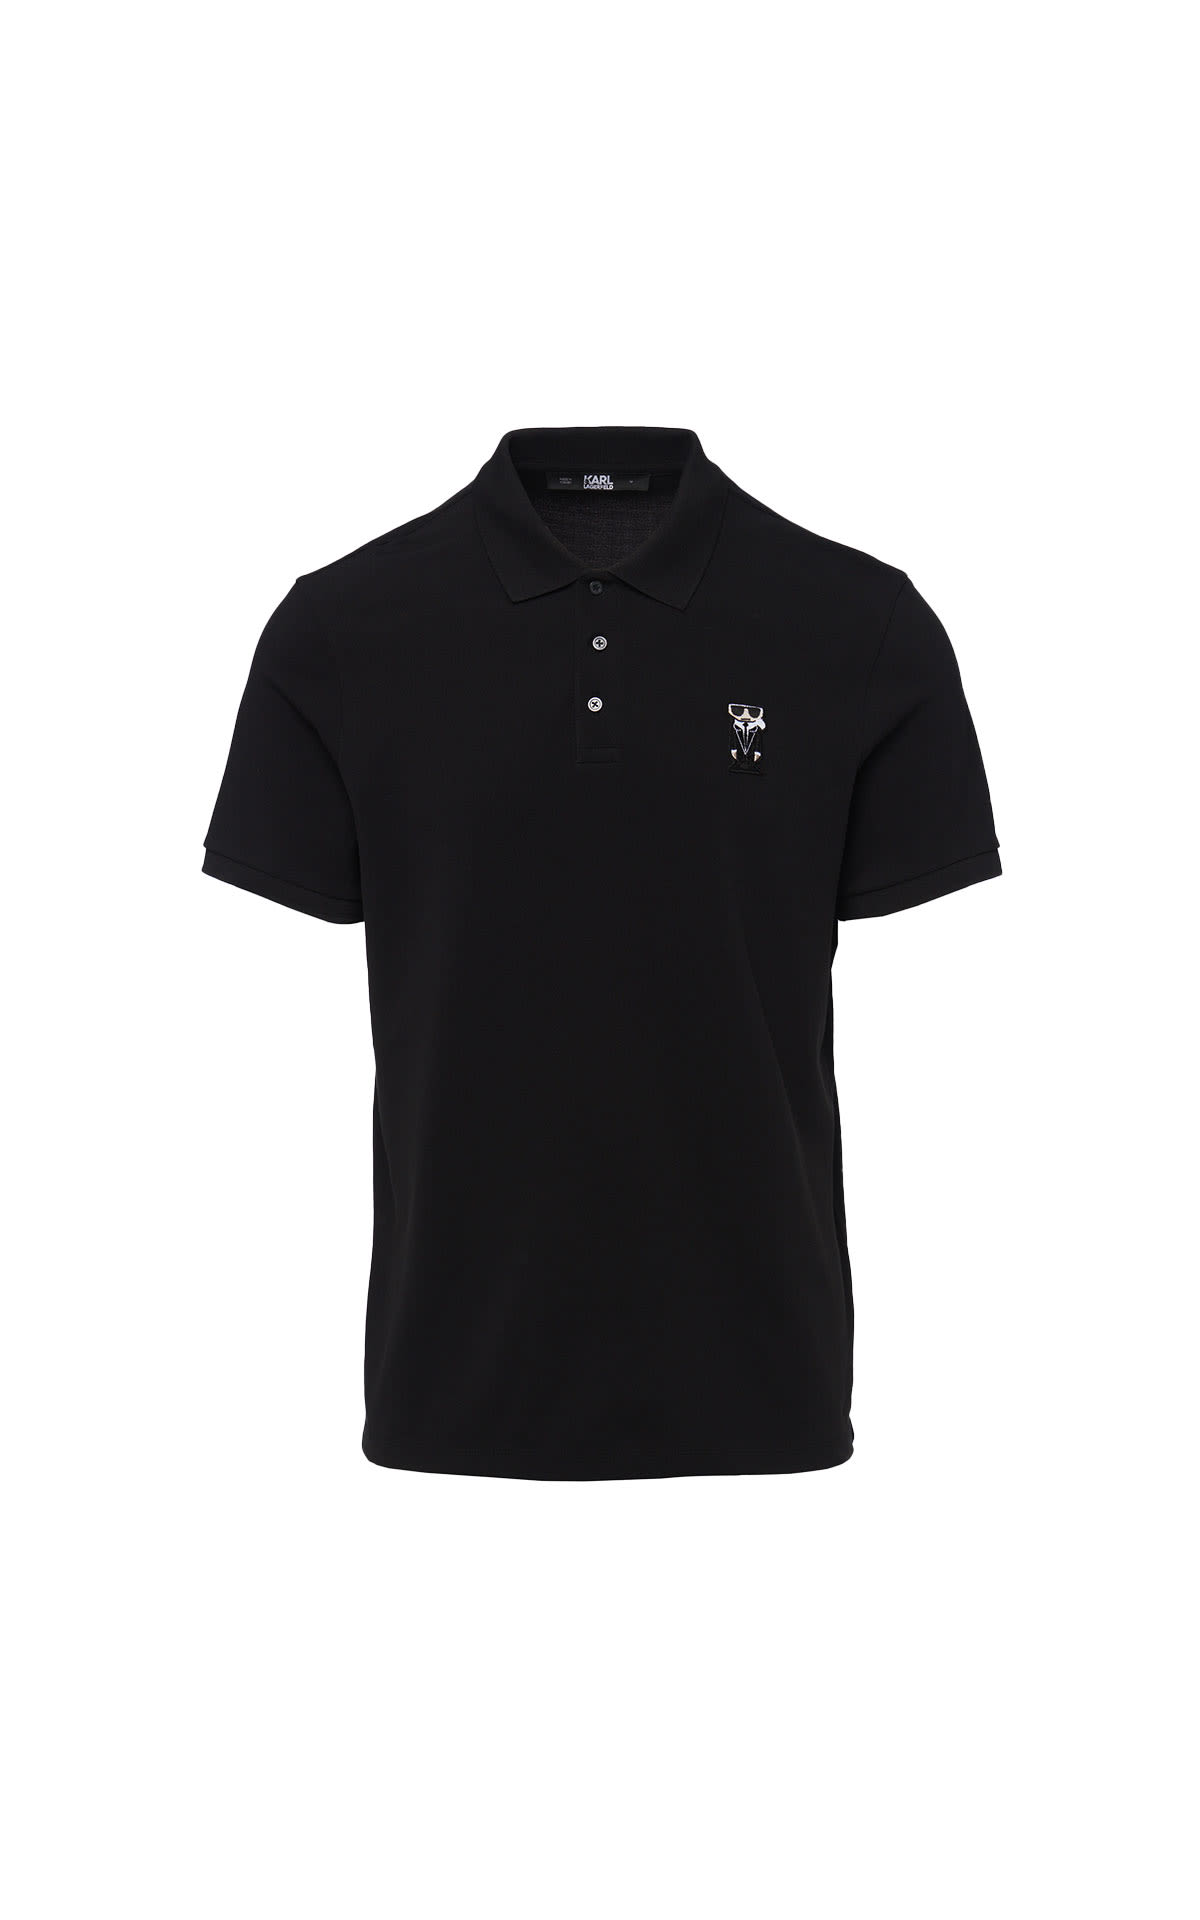 KARL LAGERFELD Kocktail patch polo from Bicester Village